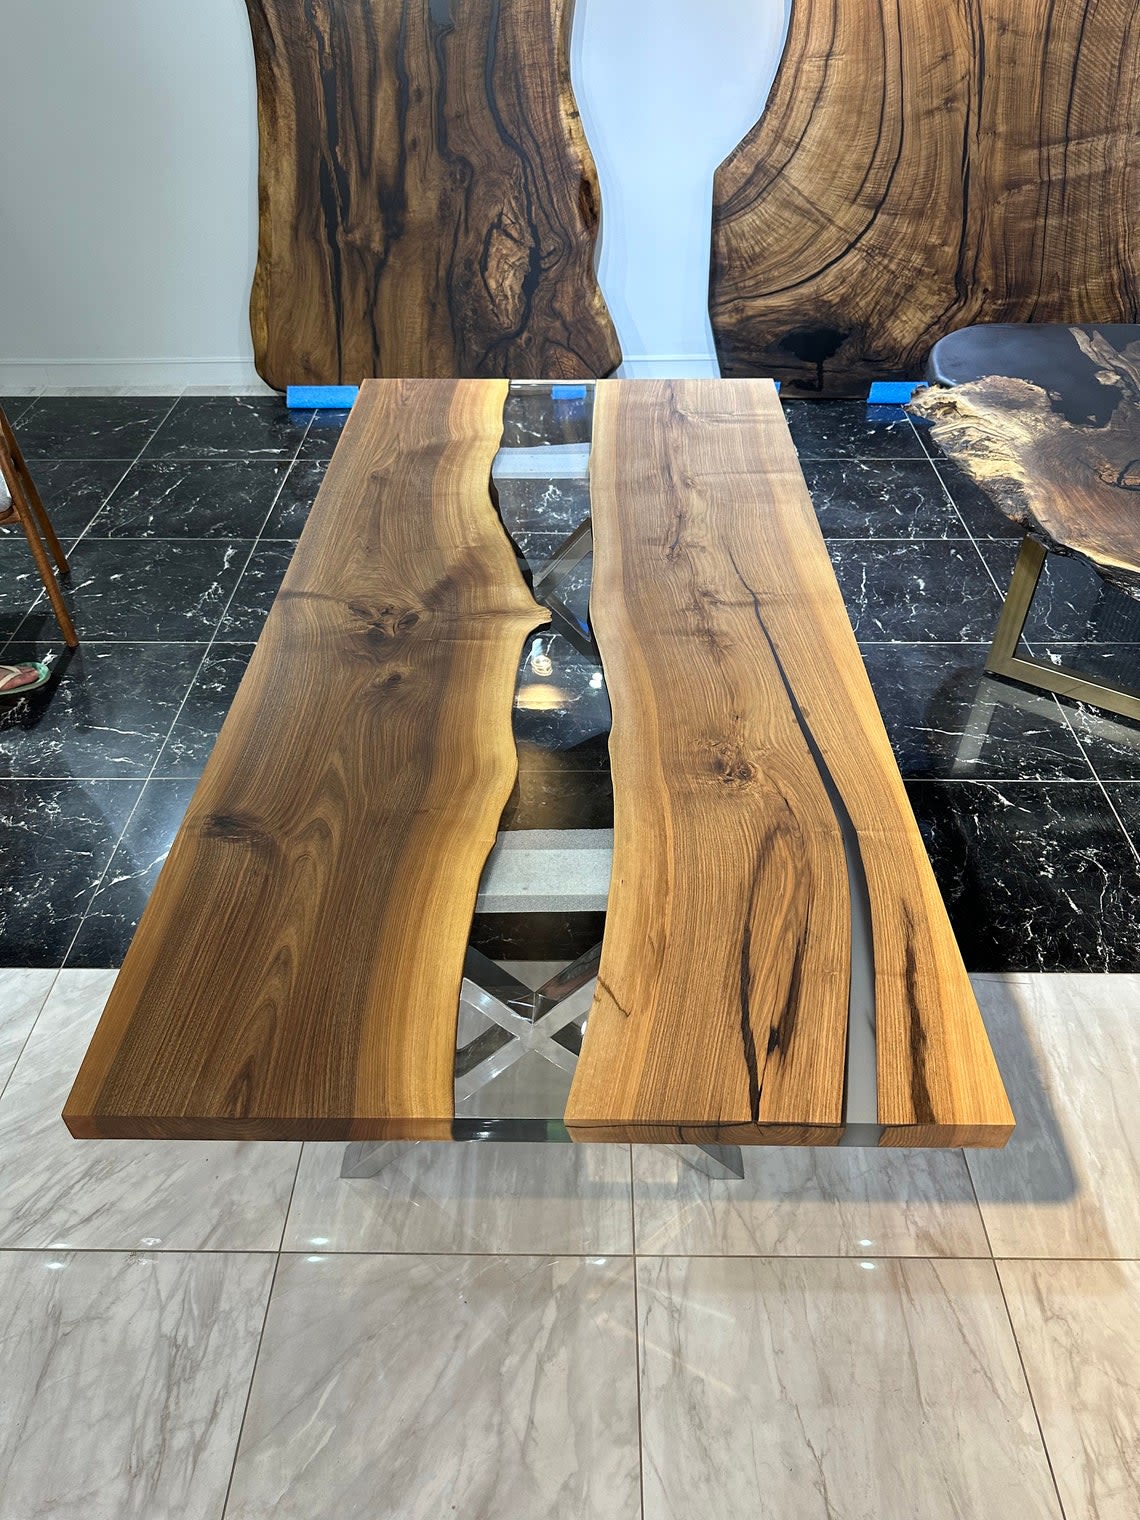 Epoxy Tables - Clear Epoxy Resin Table Top - Live Edge Table by Tinella  Wood